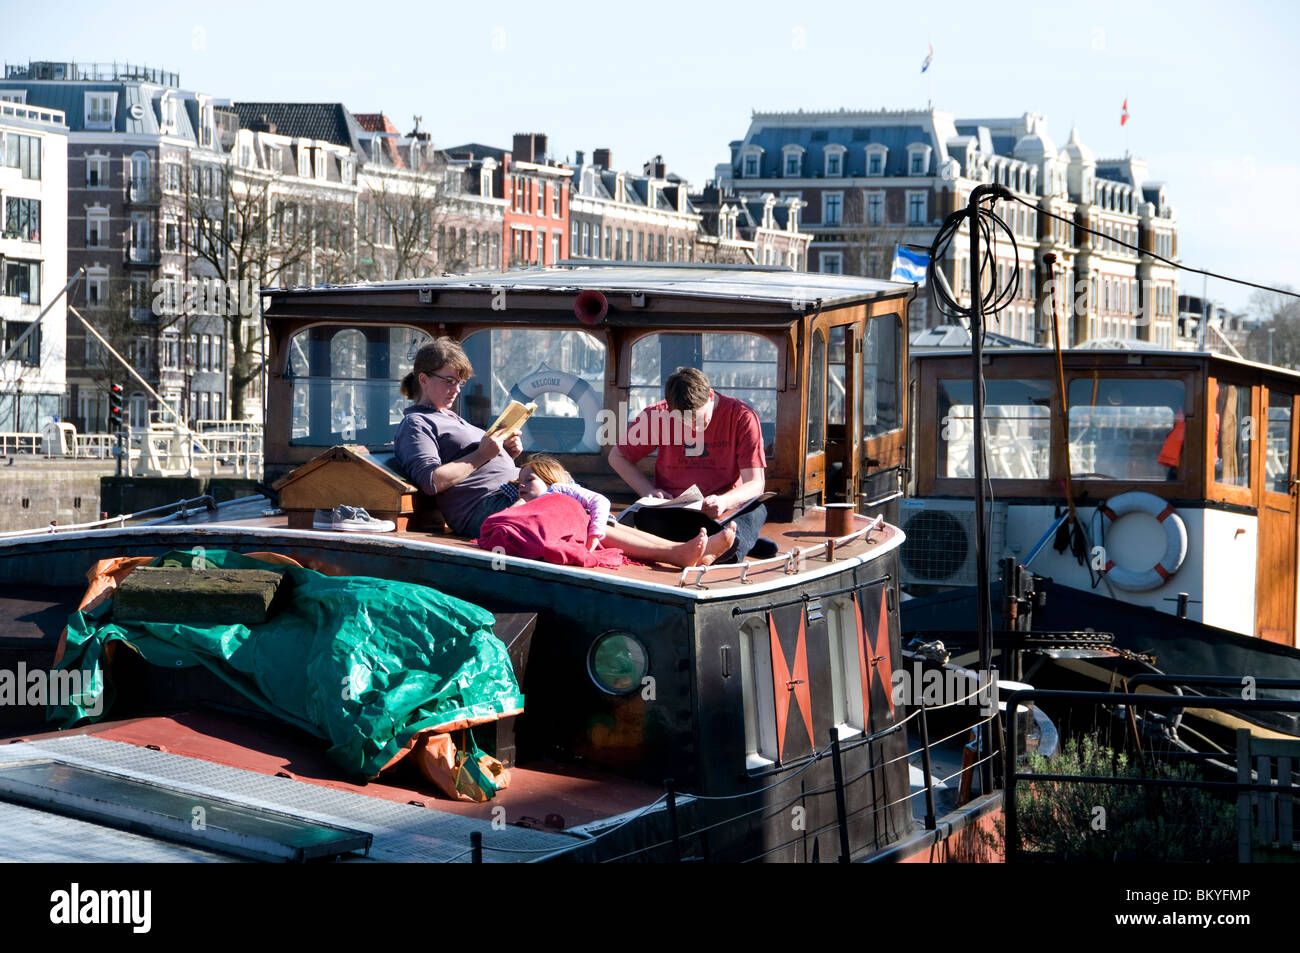 Amsterdam Amstel House Boat Canal Famille Pays-Bas Banque D'Images